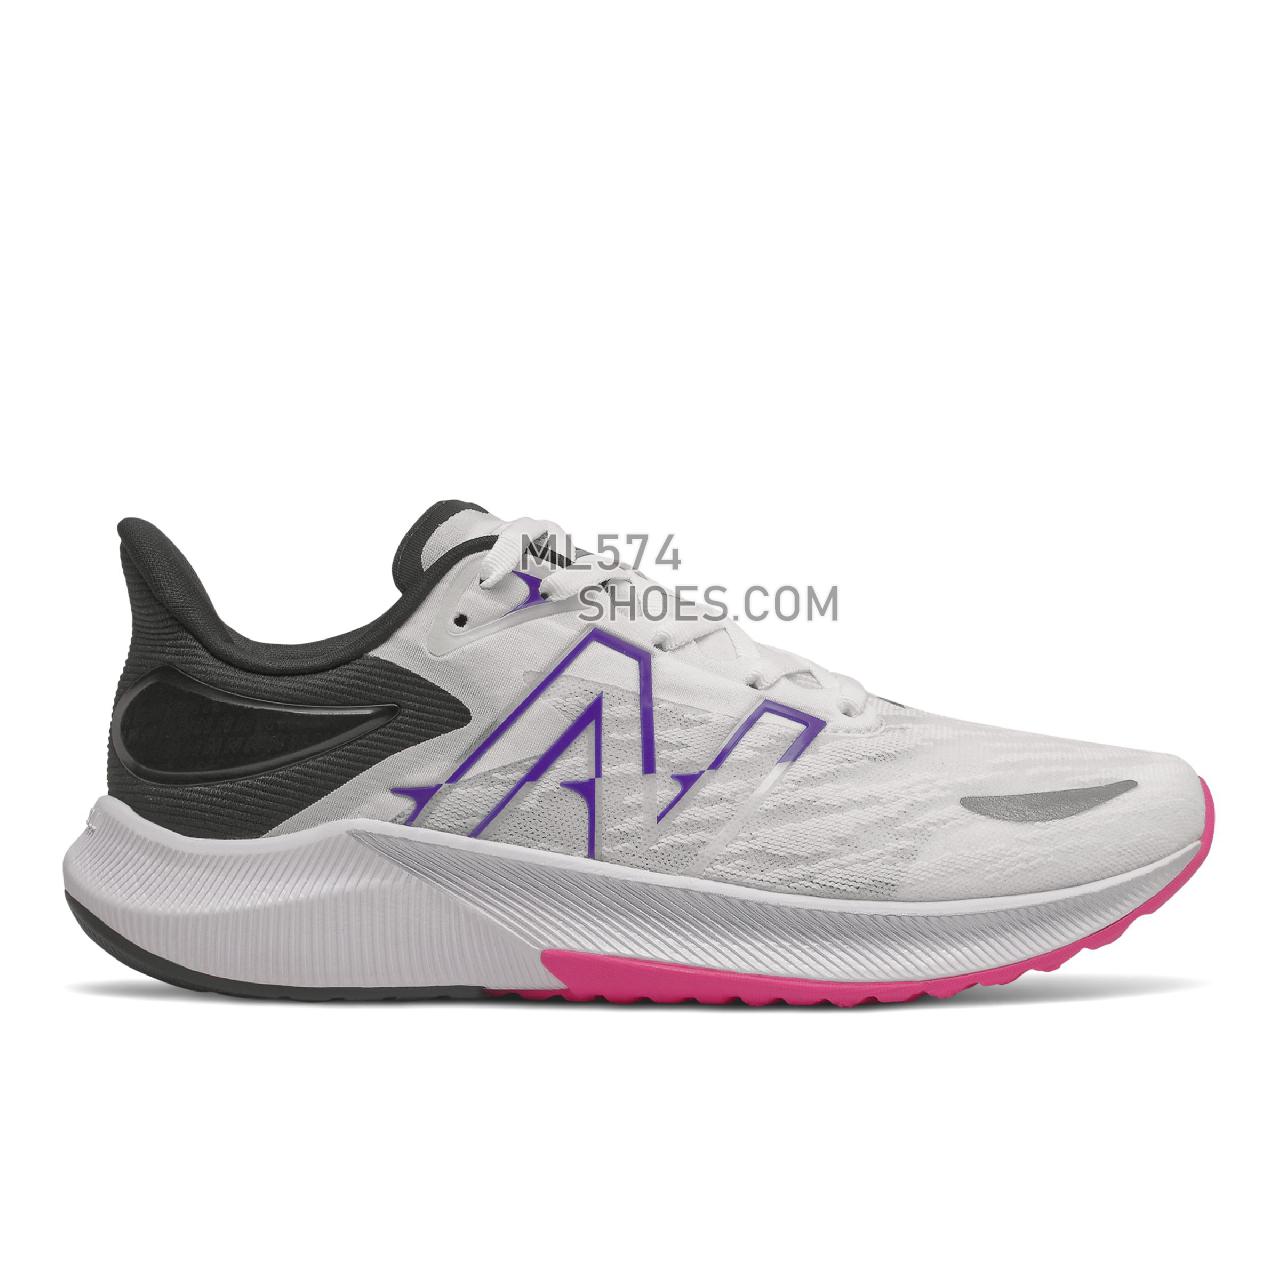 New Balance FuelCell Propel v3 - Women's Neutral Running - White with Pink Glo and Deep Violet - WFCPRLM3